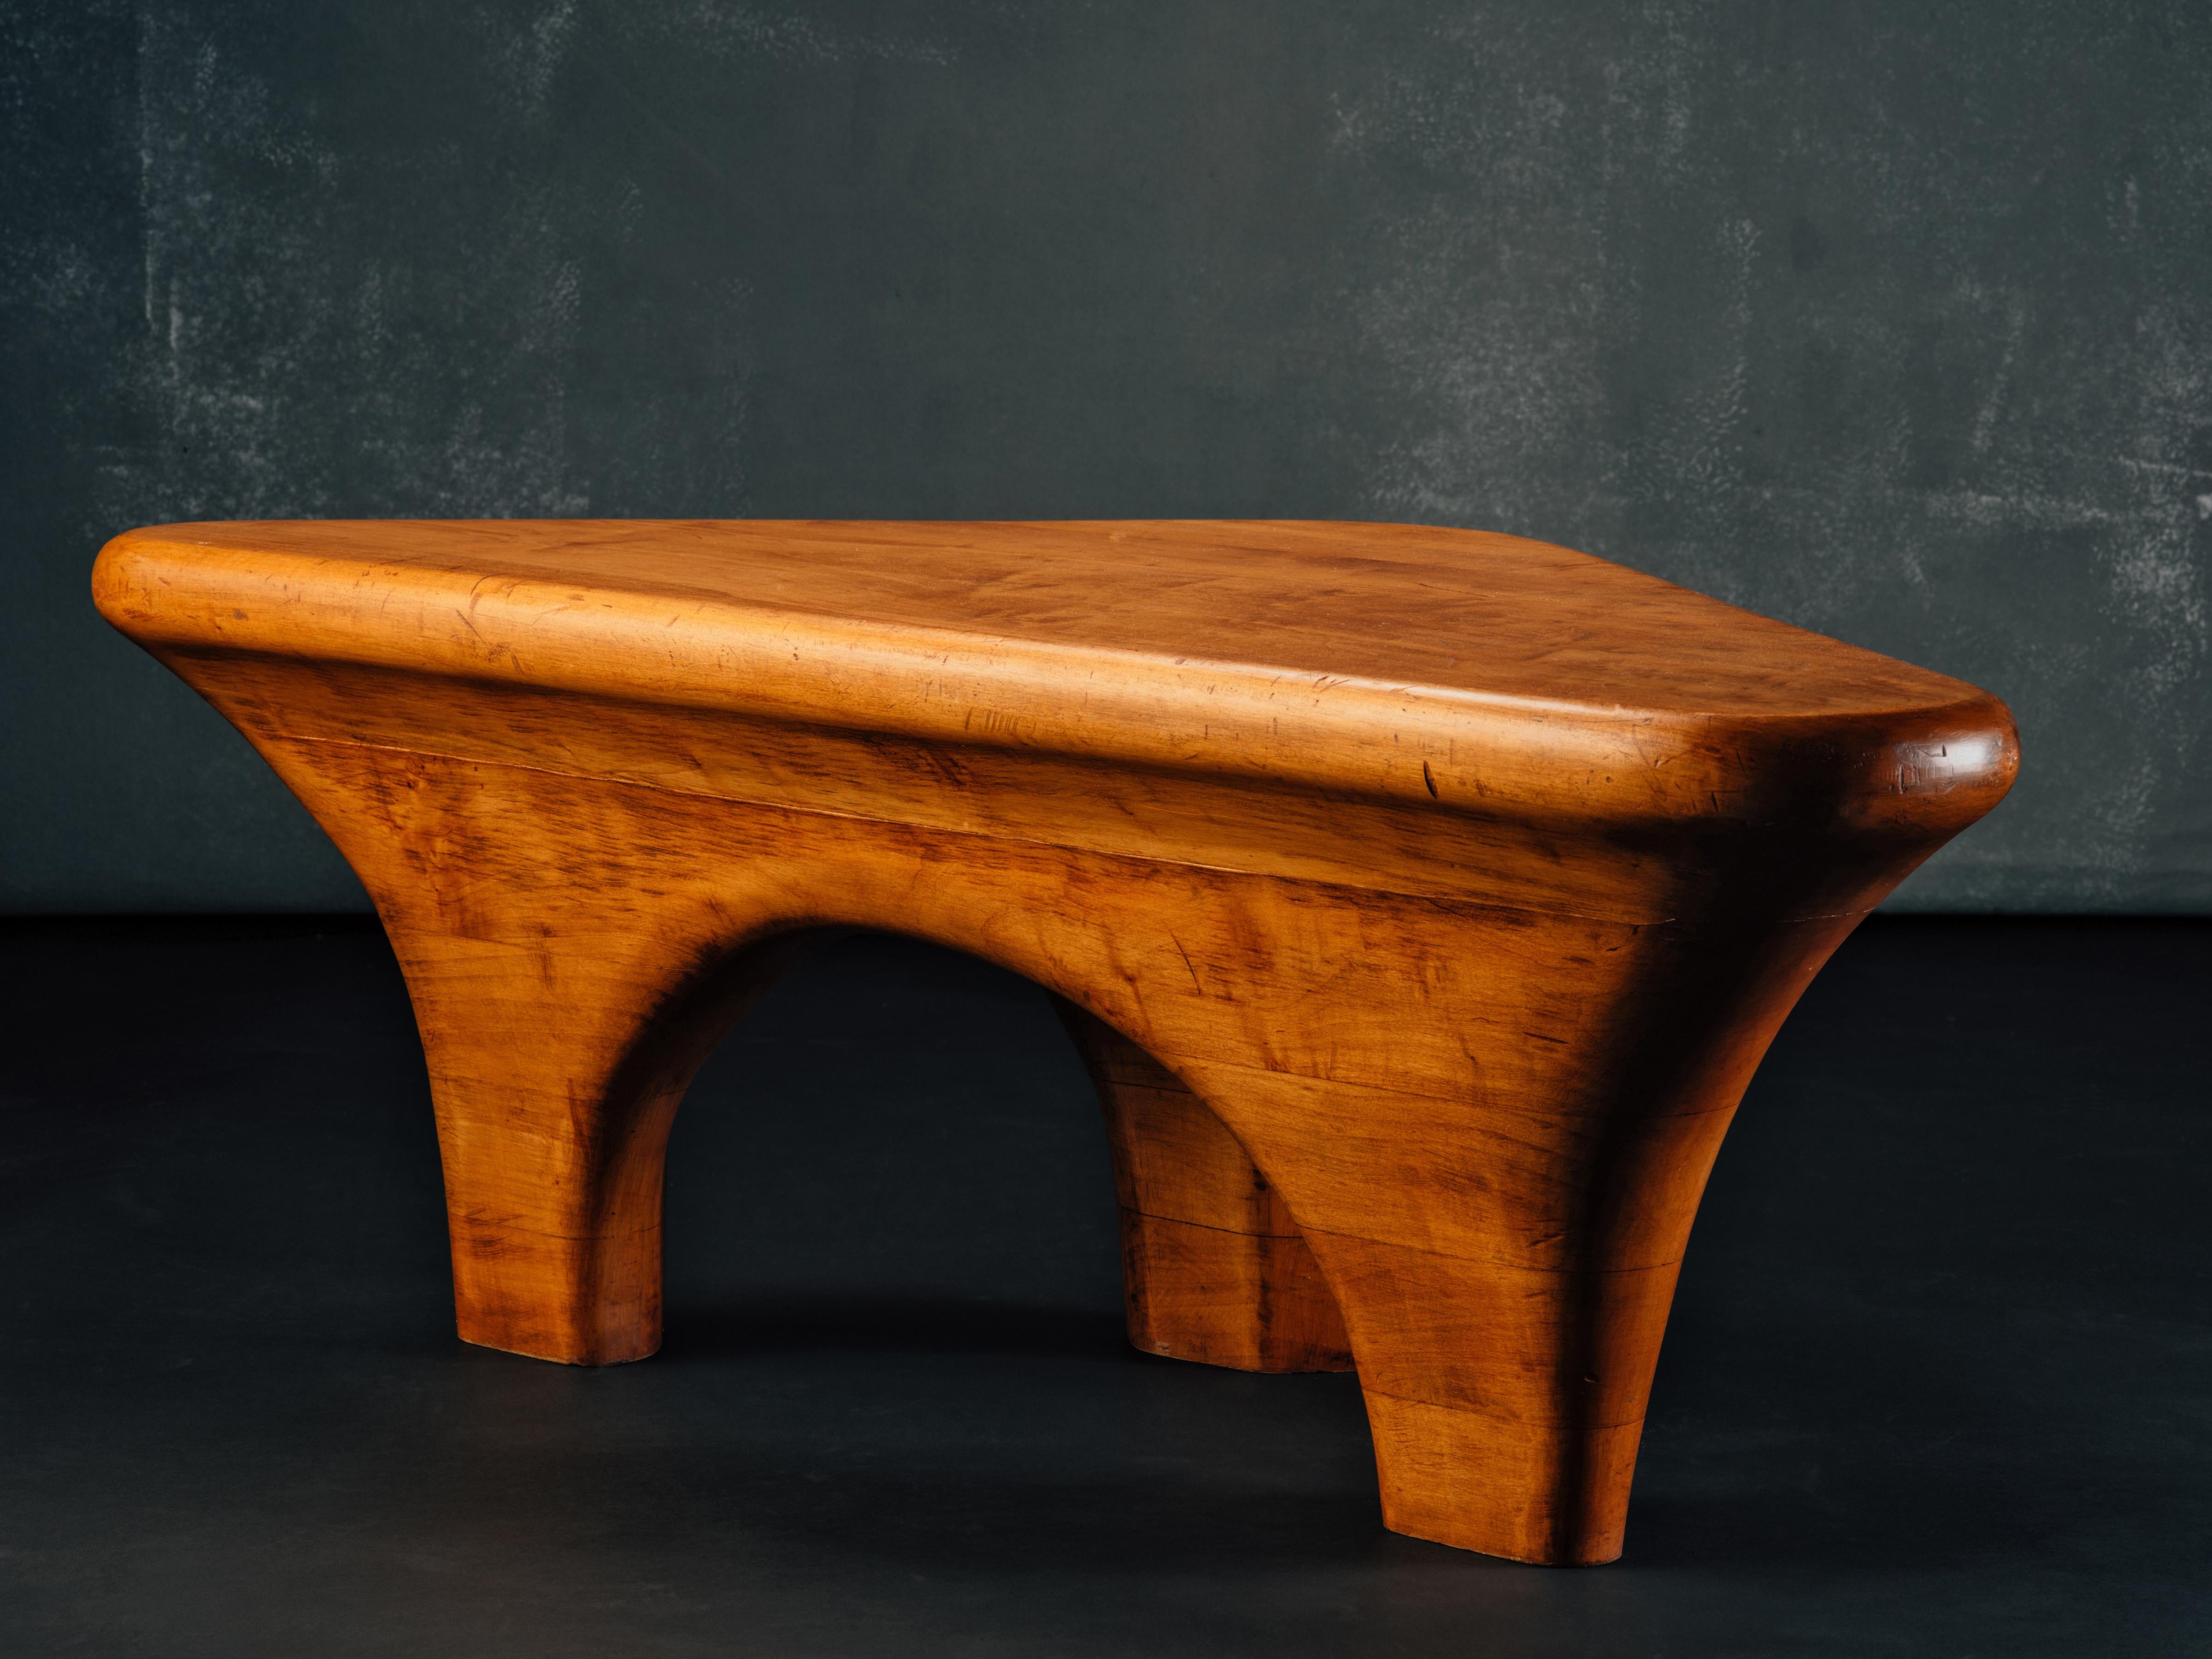 An American Studio table in stack-laminated and sculpted maple, comprising a scalene triangular top with bullnose edge, supported by an architectural, arcaded base. The form is all at once classic, modernist, and tribal, with its original finish